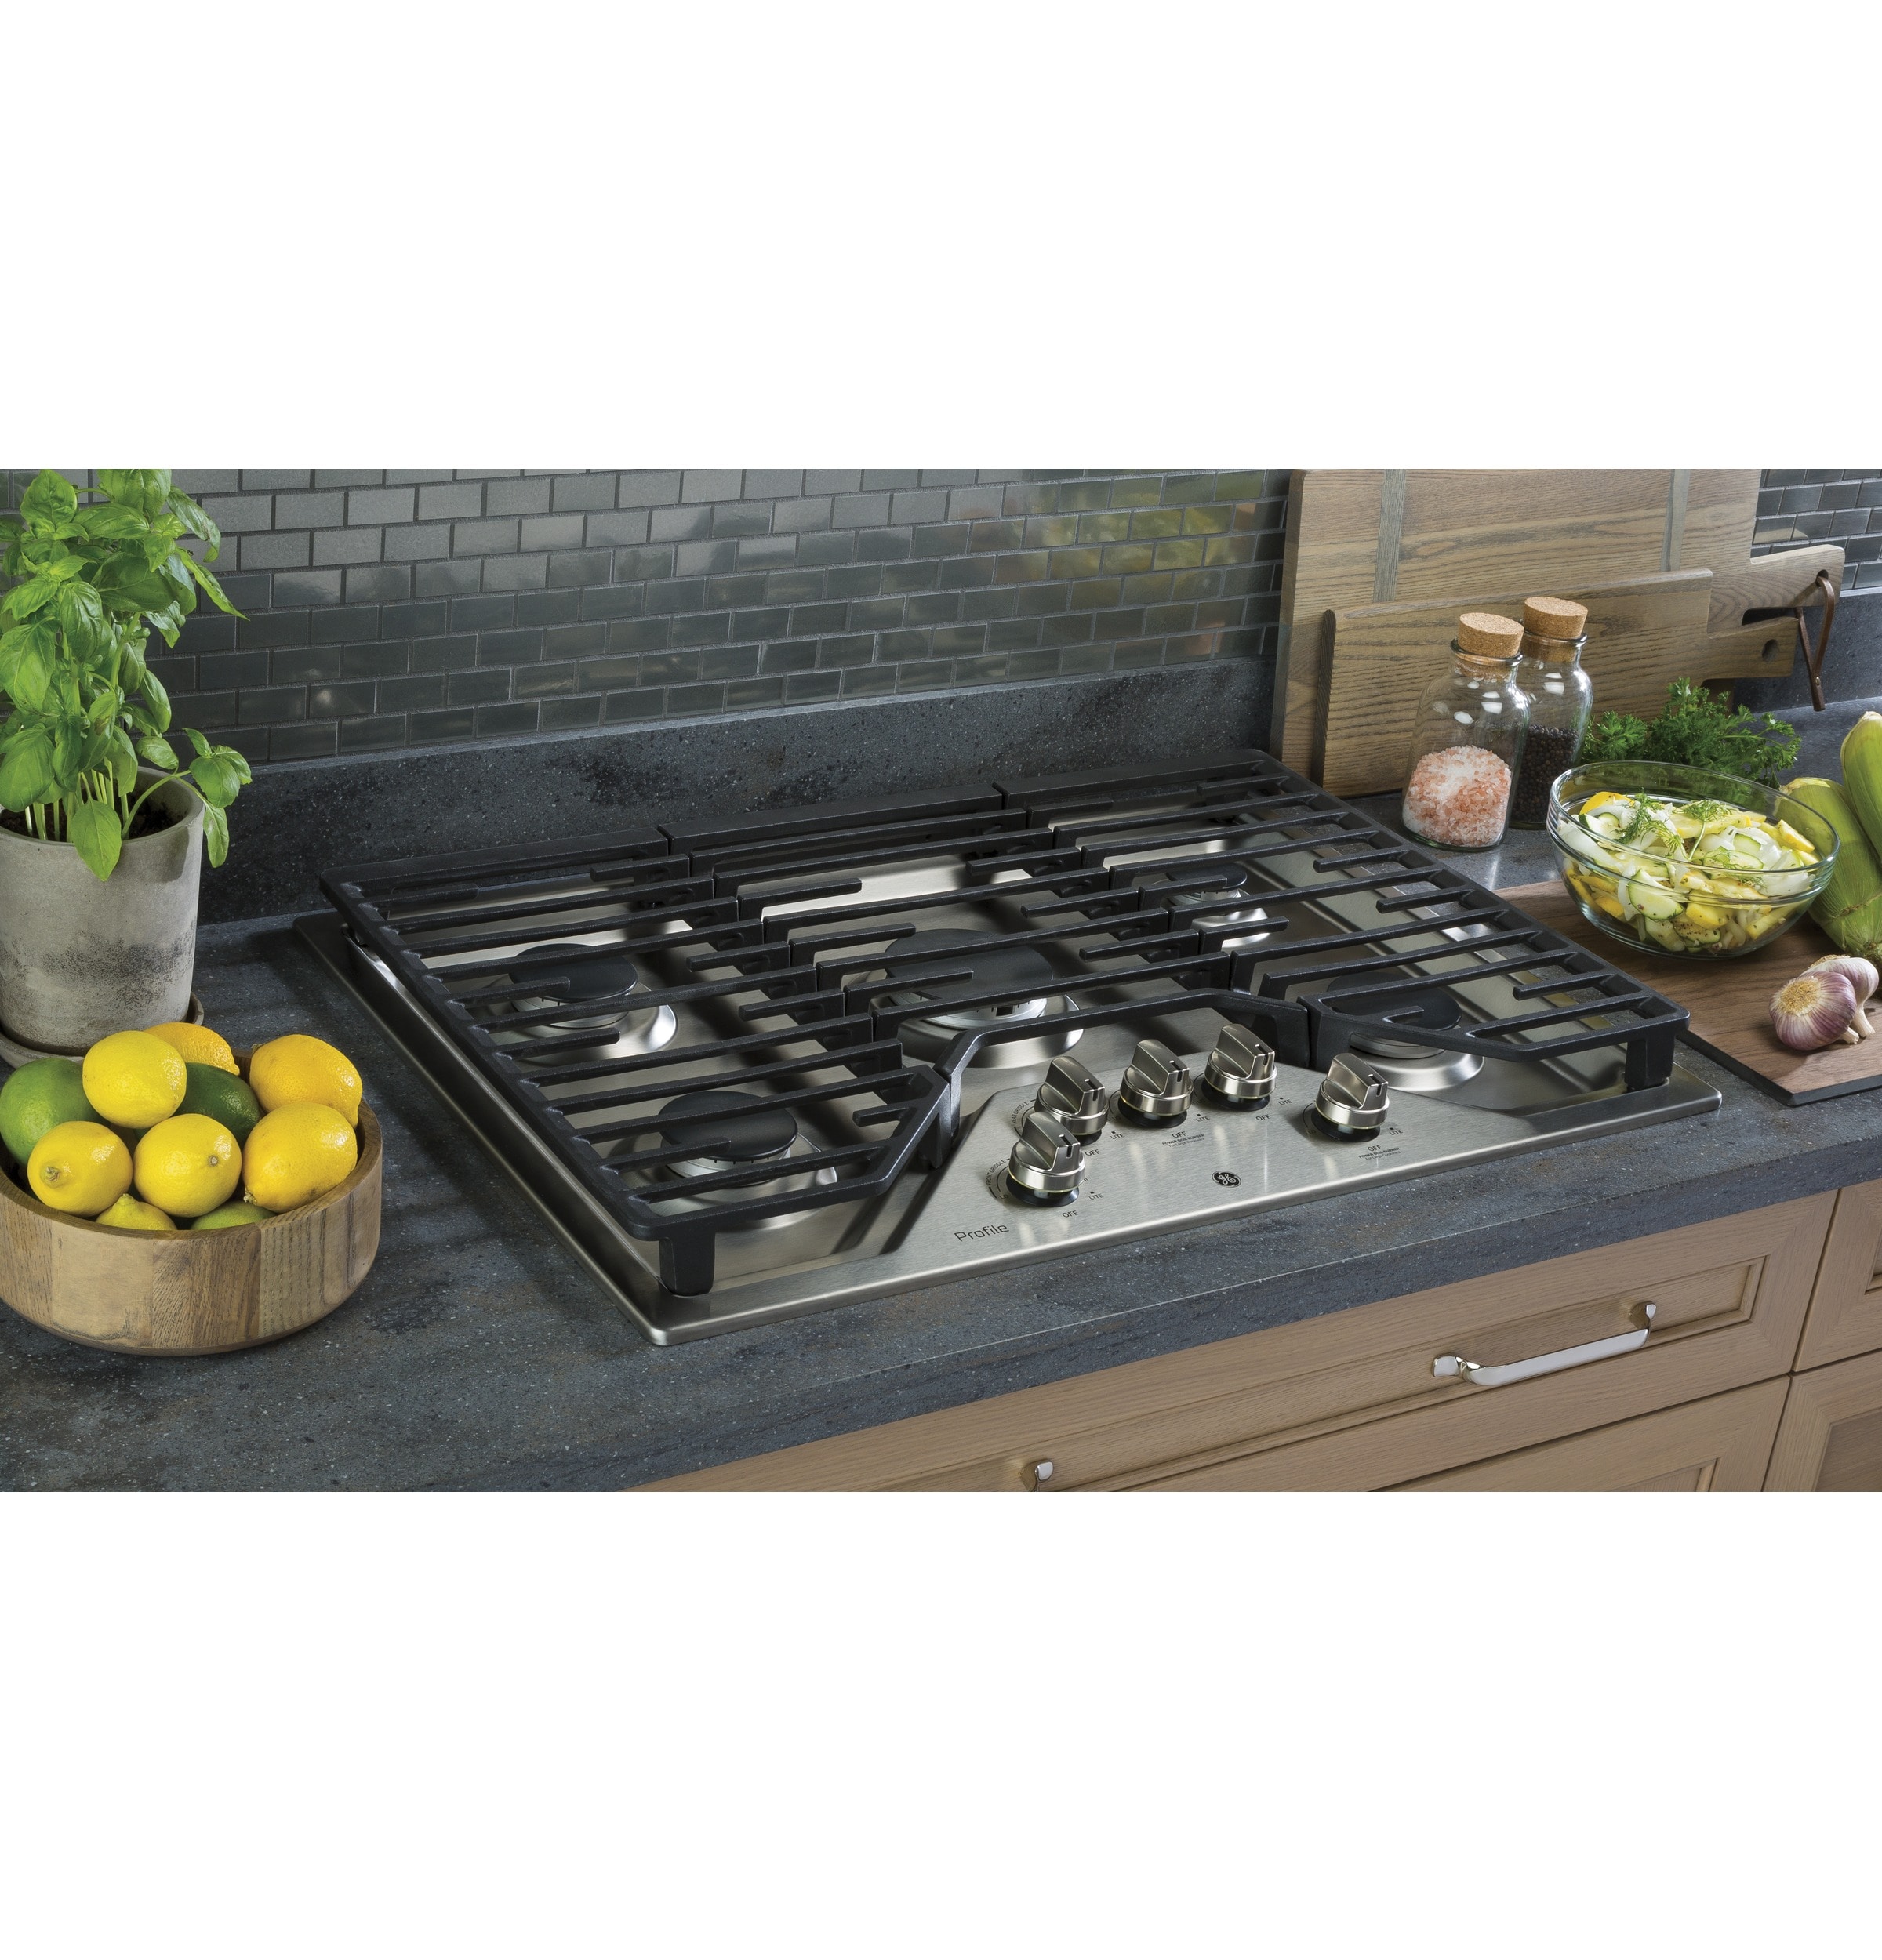 PGP9030SLSS in Stainless Steel by GE Appliances in Plymouth, MA - GE  Profile™ 30 Built-In Tri-Ring Gas Cooktop with 5 Burners and Included  Extra-Large Integrated Griddle